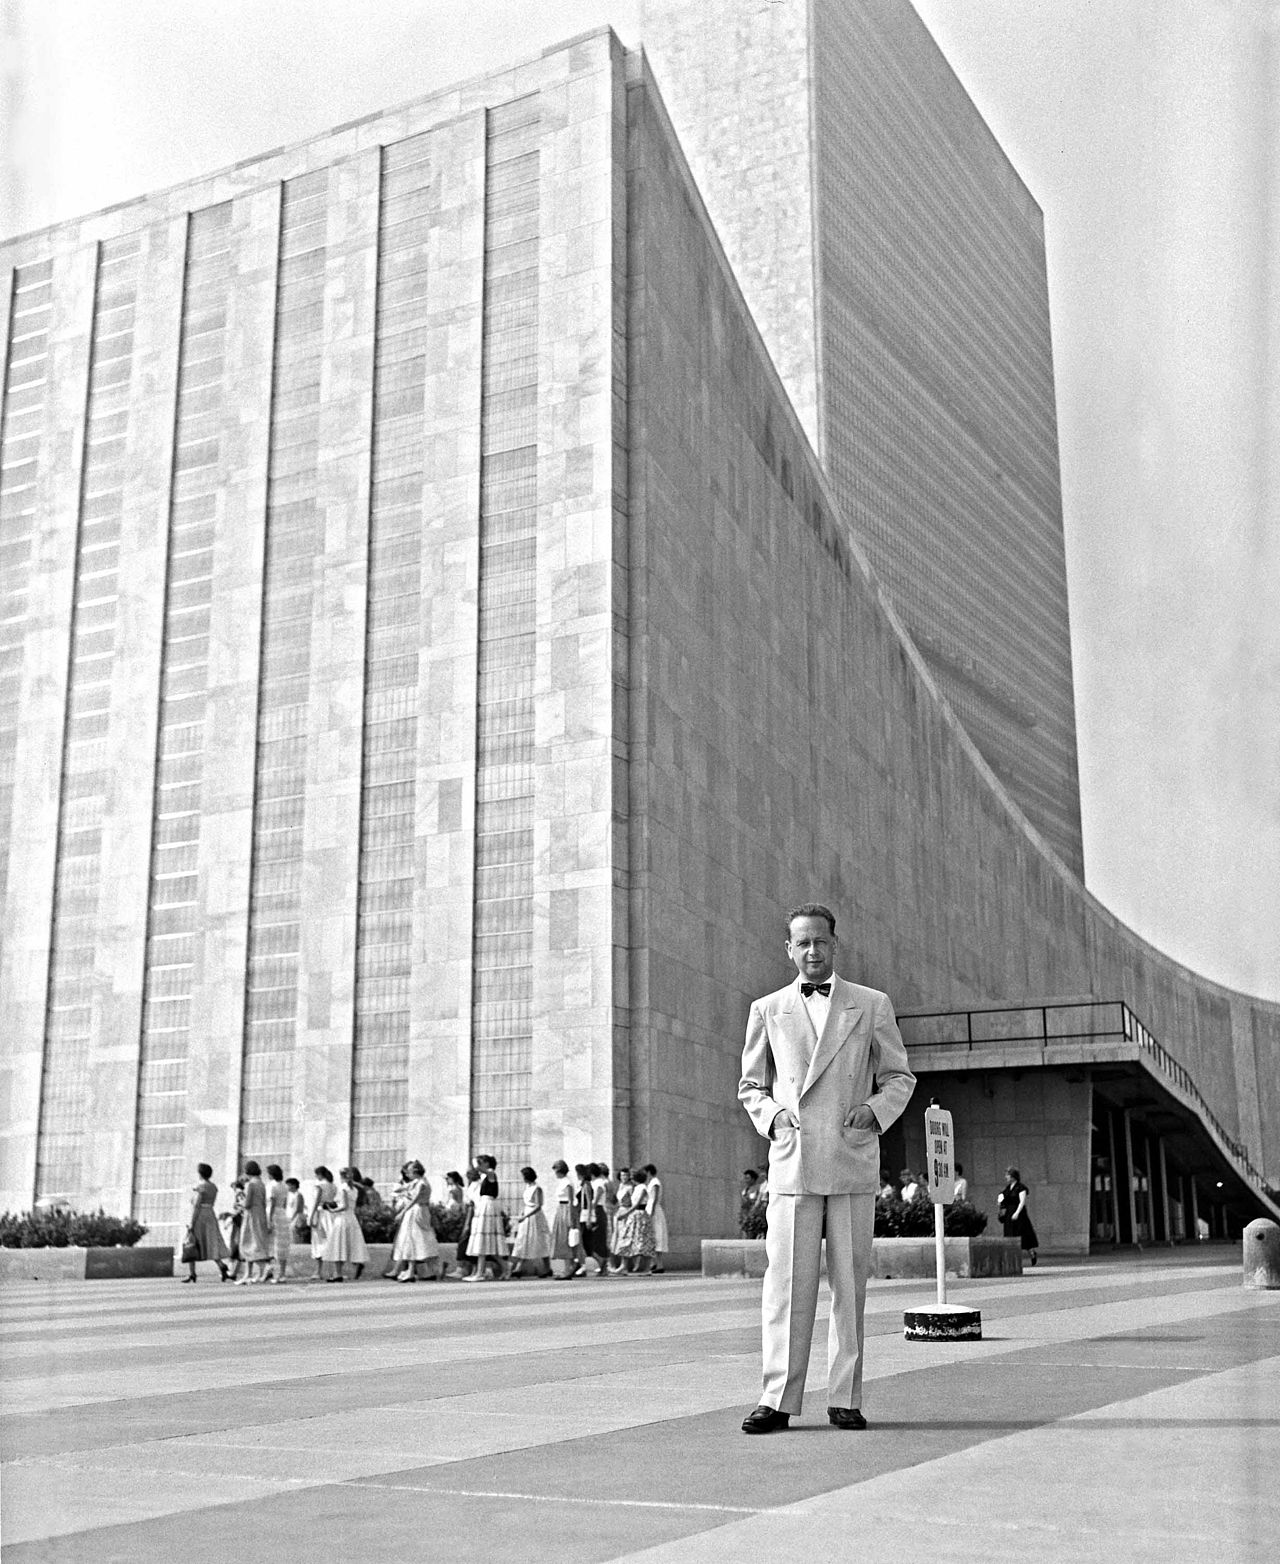 The 2nd Secretary-General of the United Nations, Dag Hammarskjöld, in front of the General Assembly Building